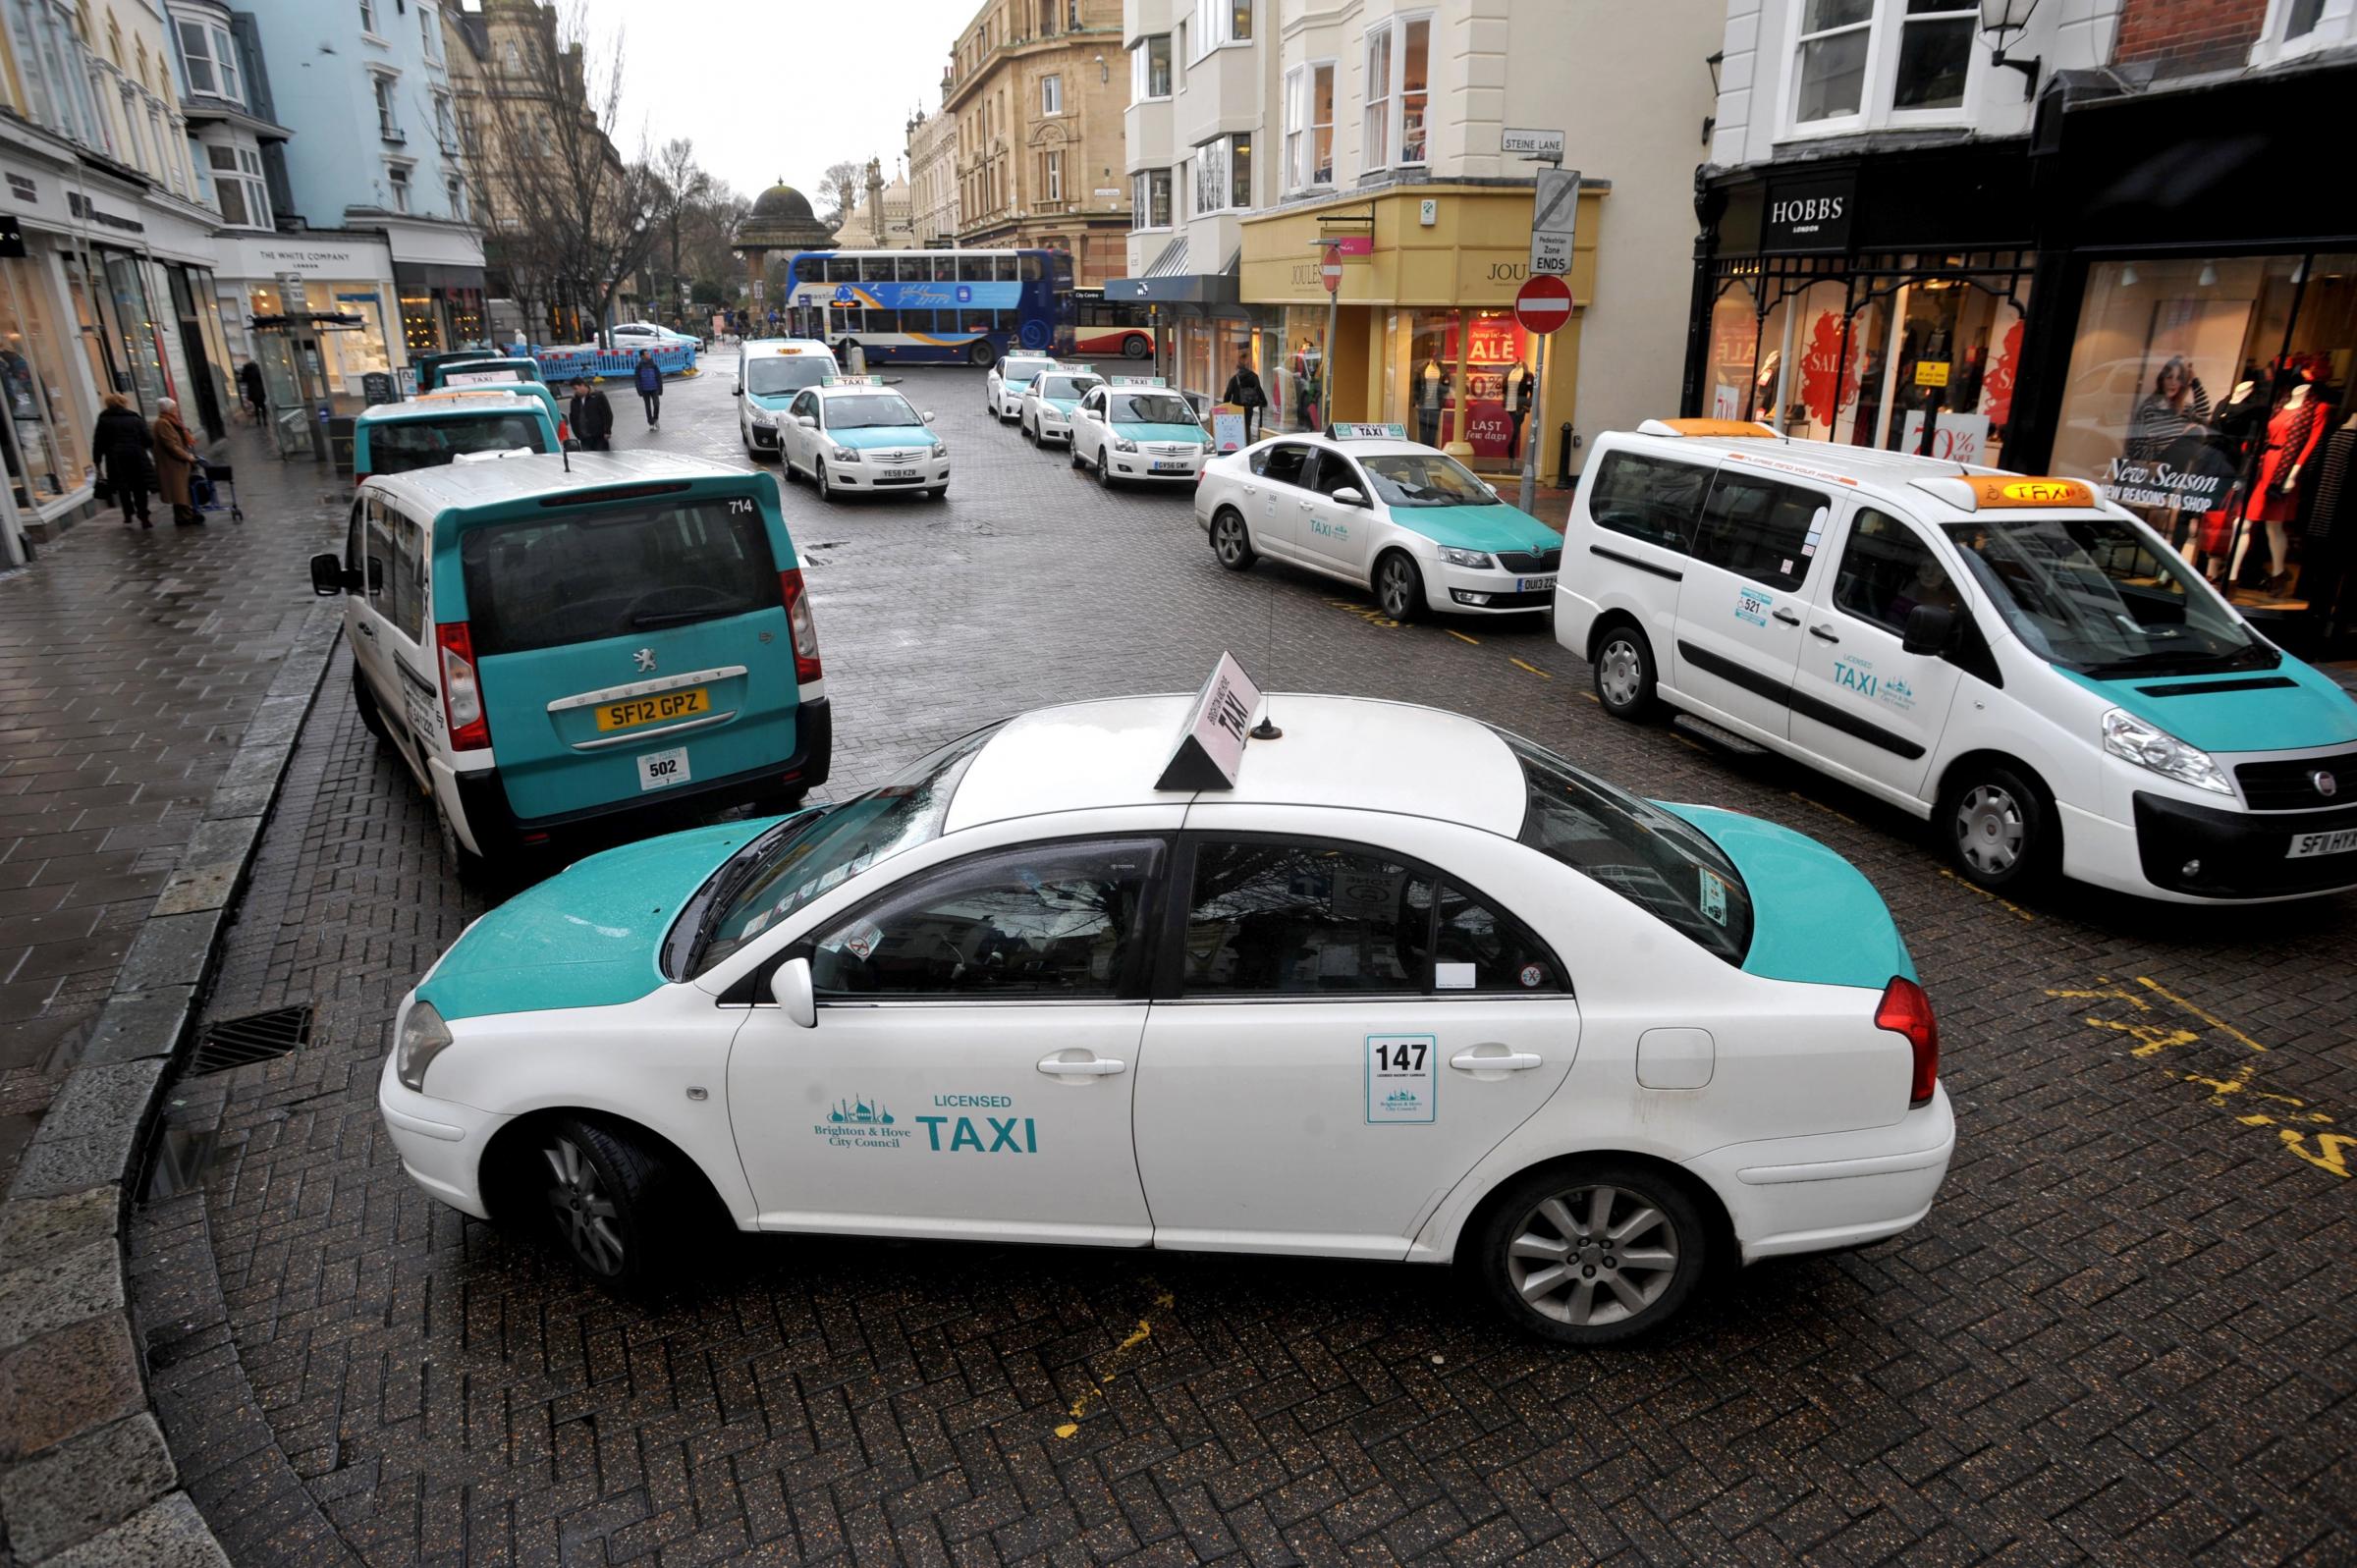 Taxi fares set to increase by about 20p per mile